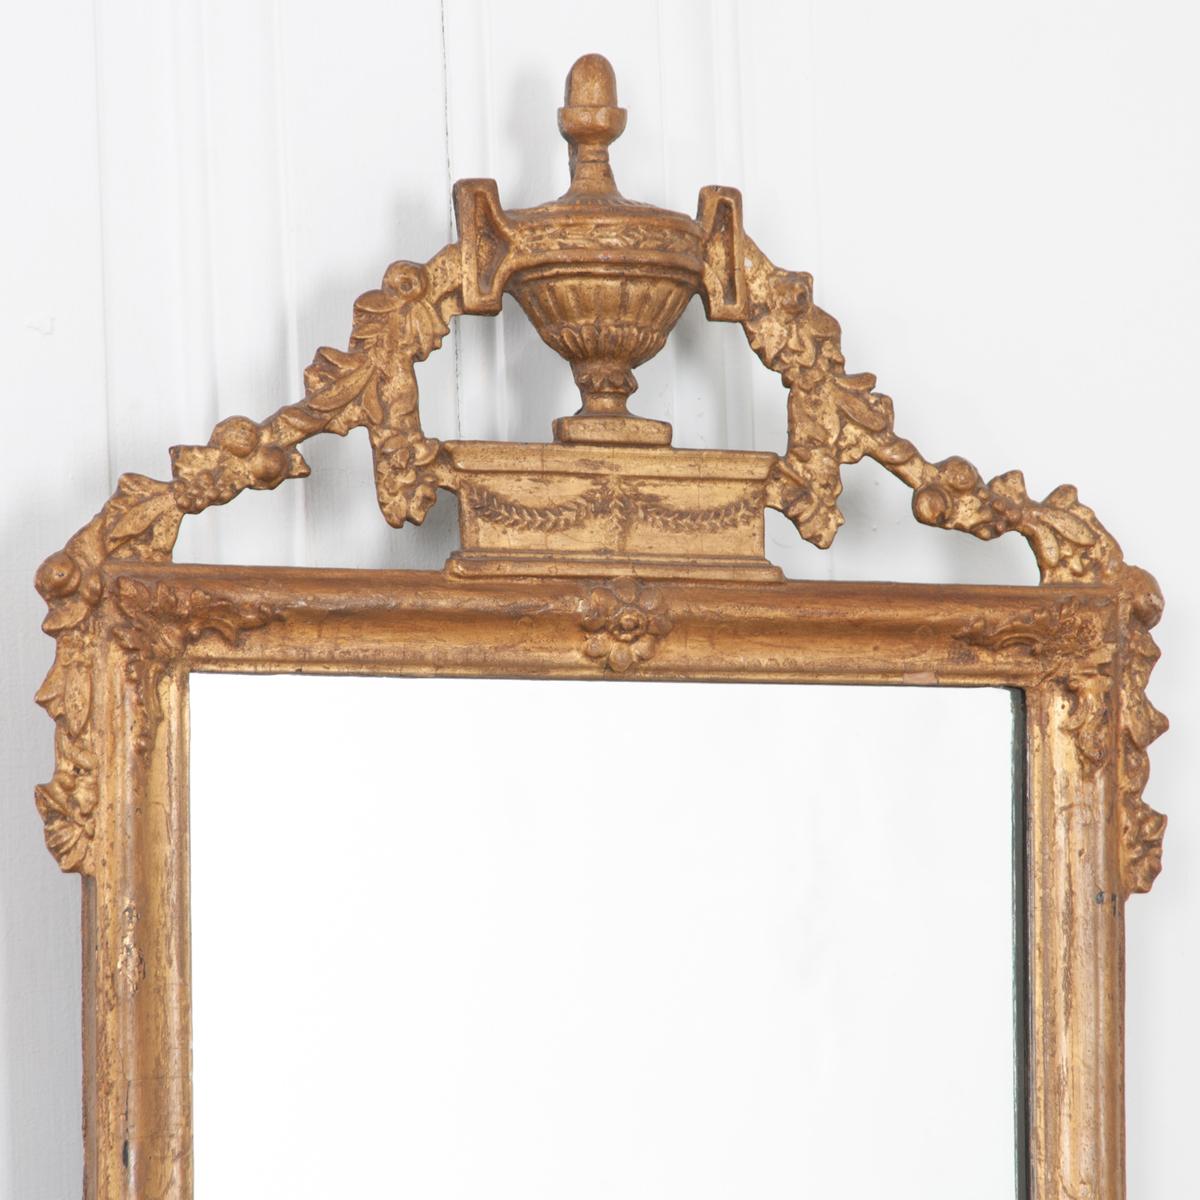 Beautifully hand-carved, this giltwood mirror is overflowing with detail. A carved urn with floral garland triangulates the top of the frame and drapes below the bottom. Each corner of the frame is carved with floral ornamentation. Recently updated